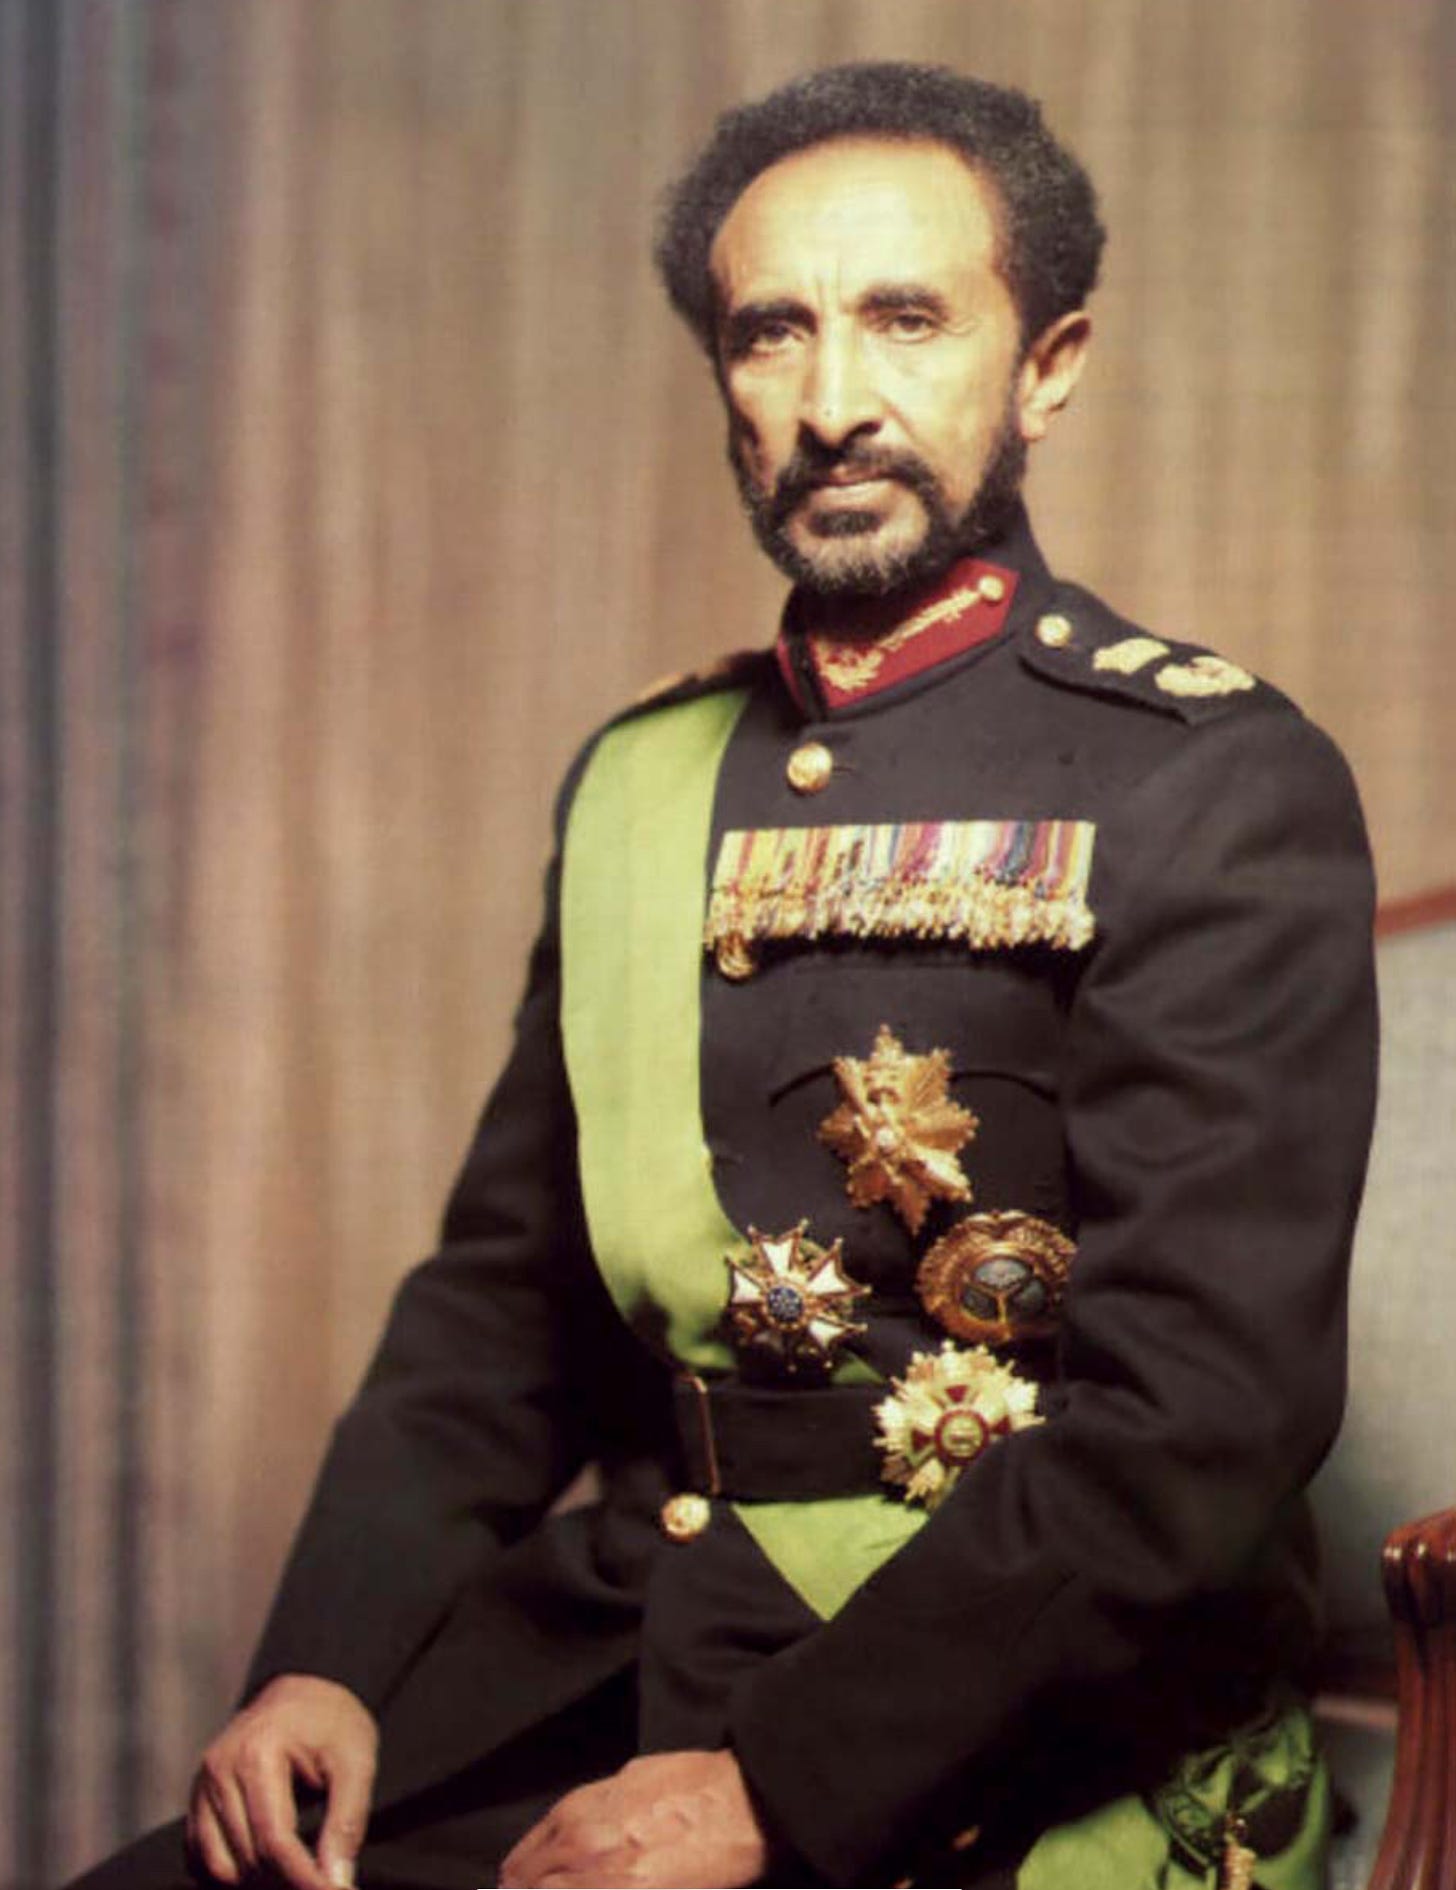 Emperor Haile Selassie, photographed about 11 years before his overthrow